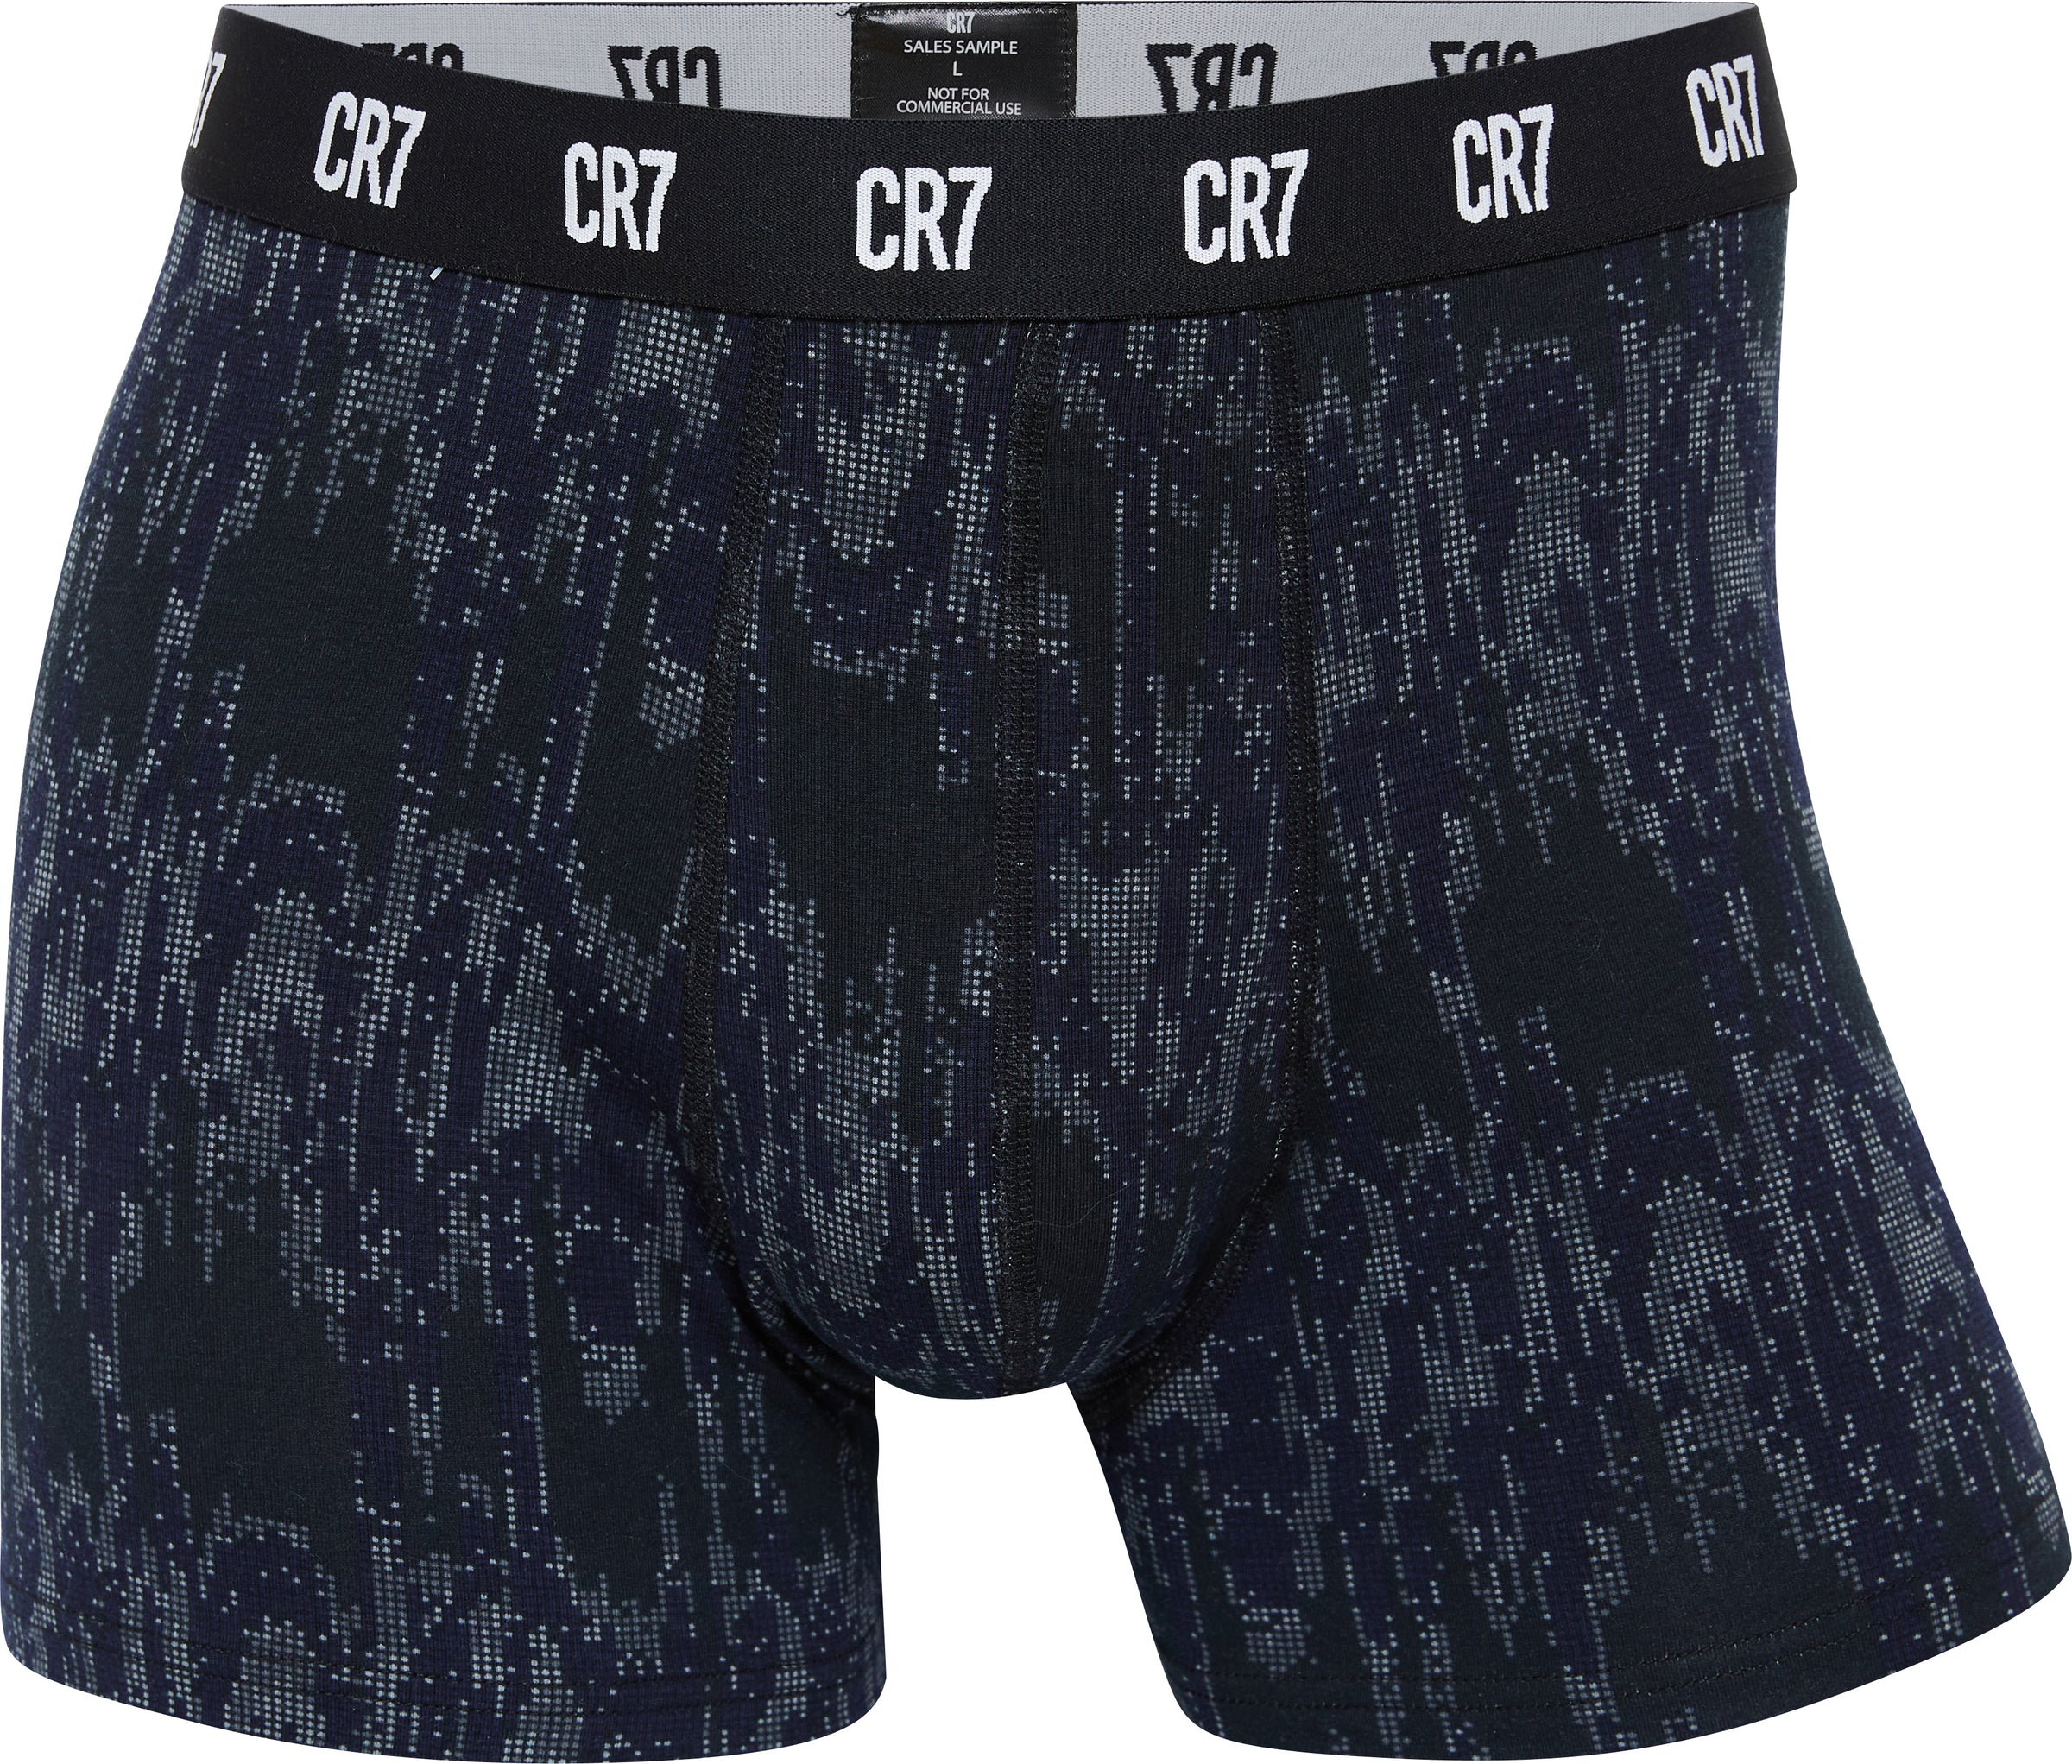 SURSTOCKAGE 50% OFF CR7 Hommes 1 Pack Fashion Navy Micro Mesh